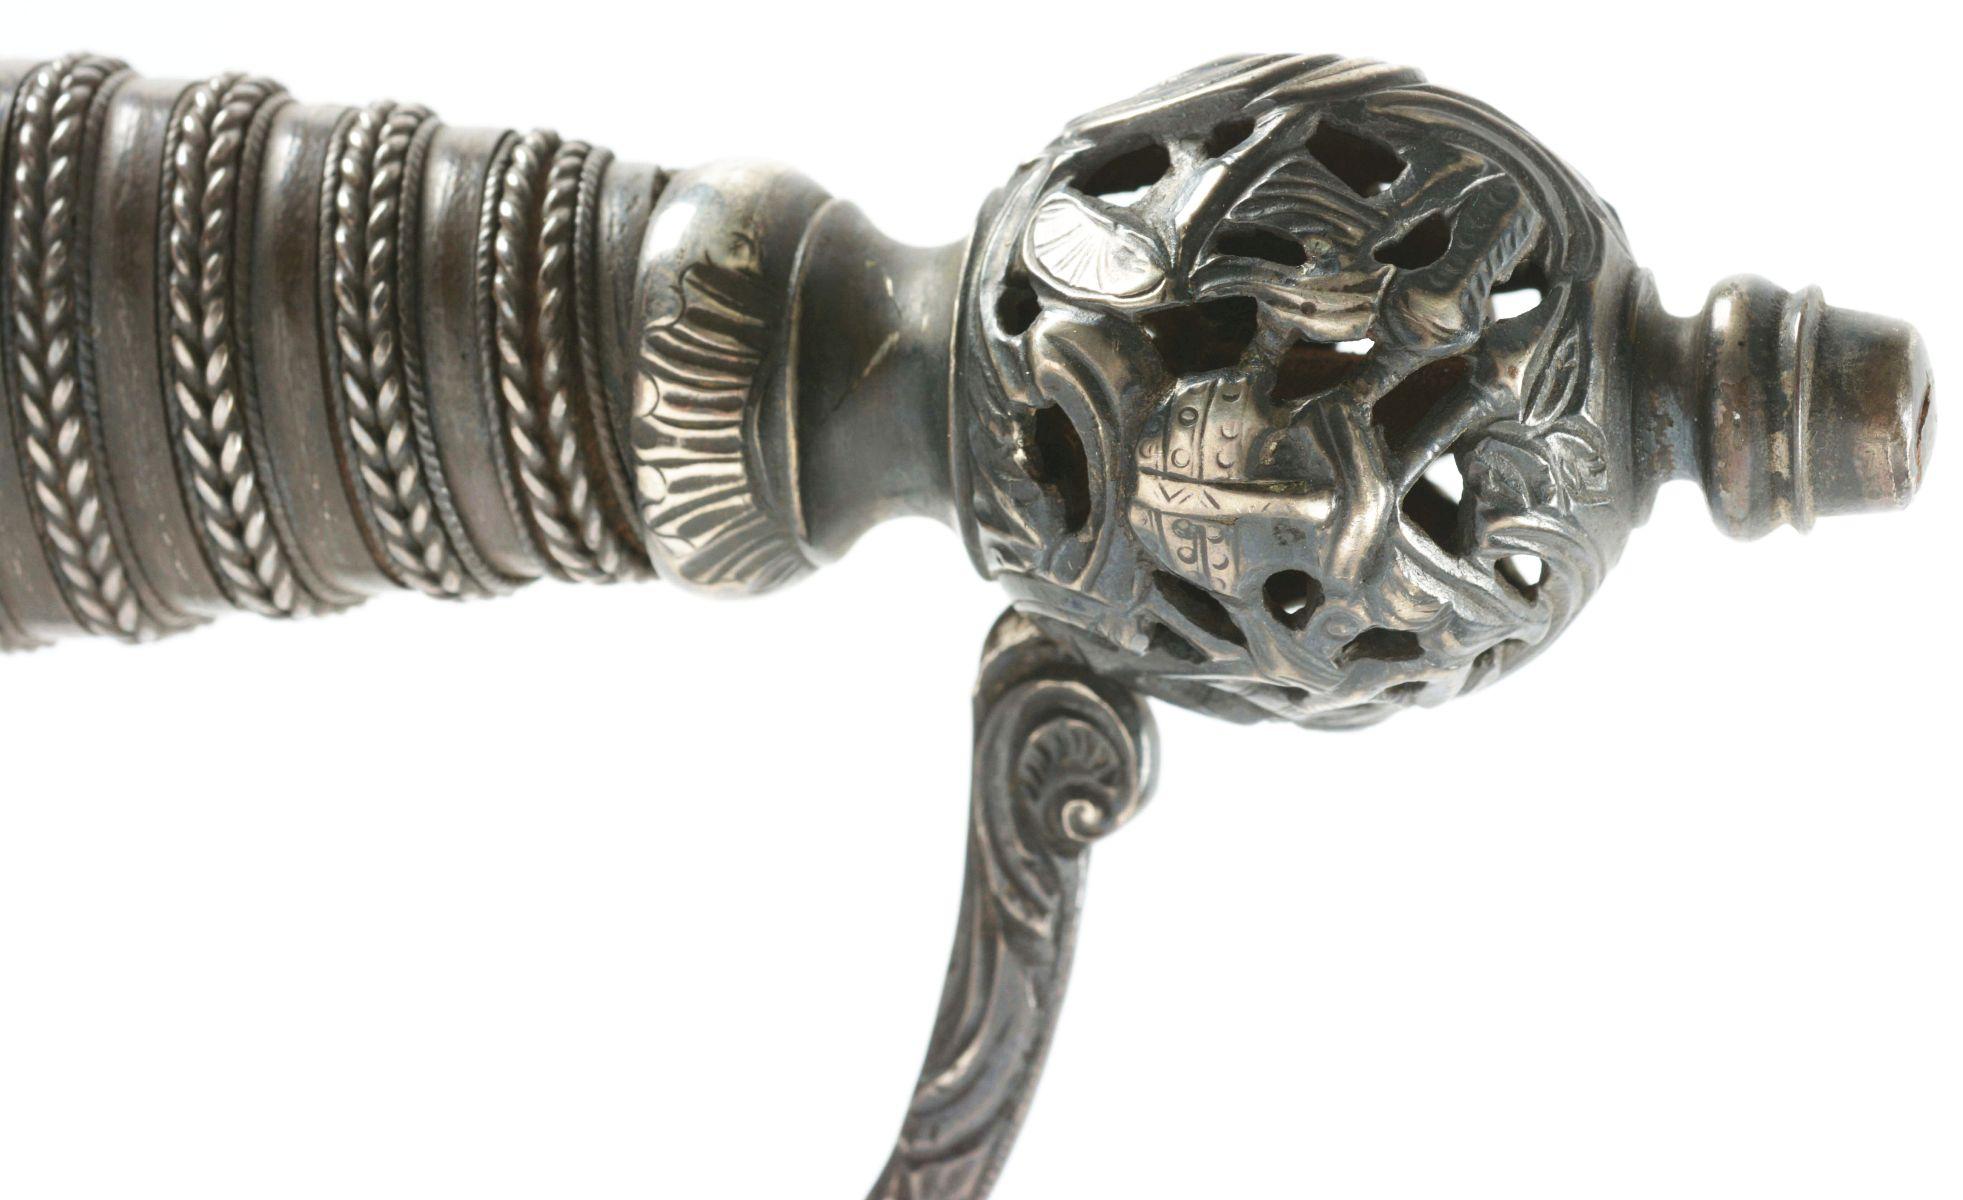 FINE SILVER-HILTED SMALL SWORD DECORATED WITH NAVAL MILITARY MOTIFS.